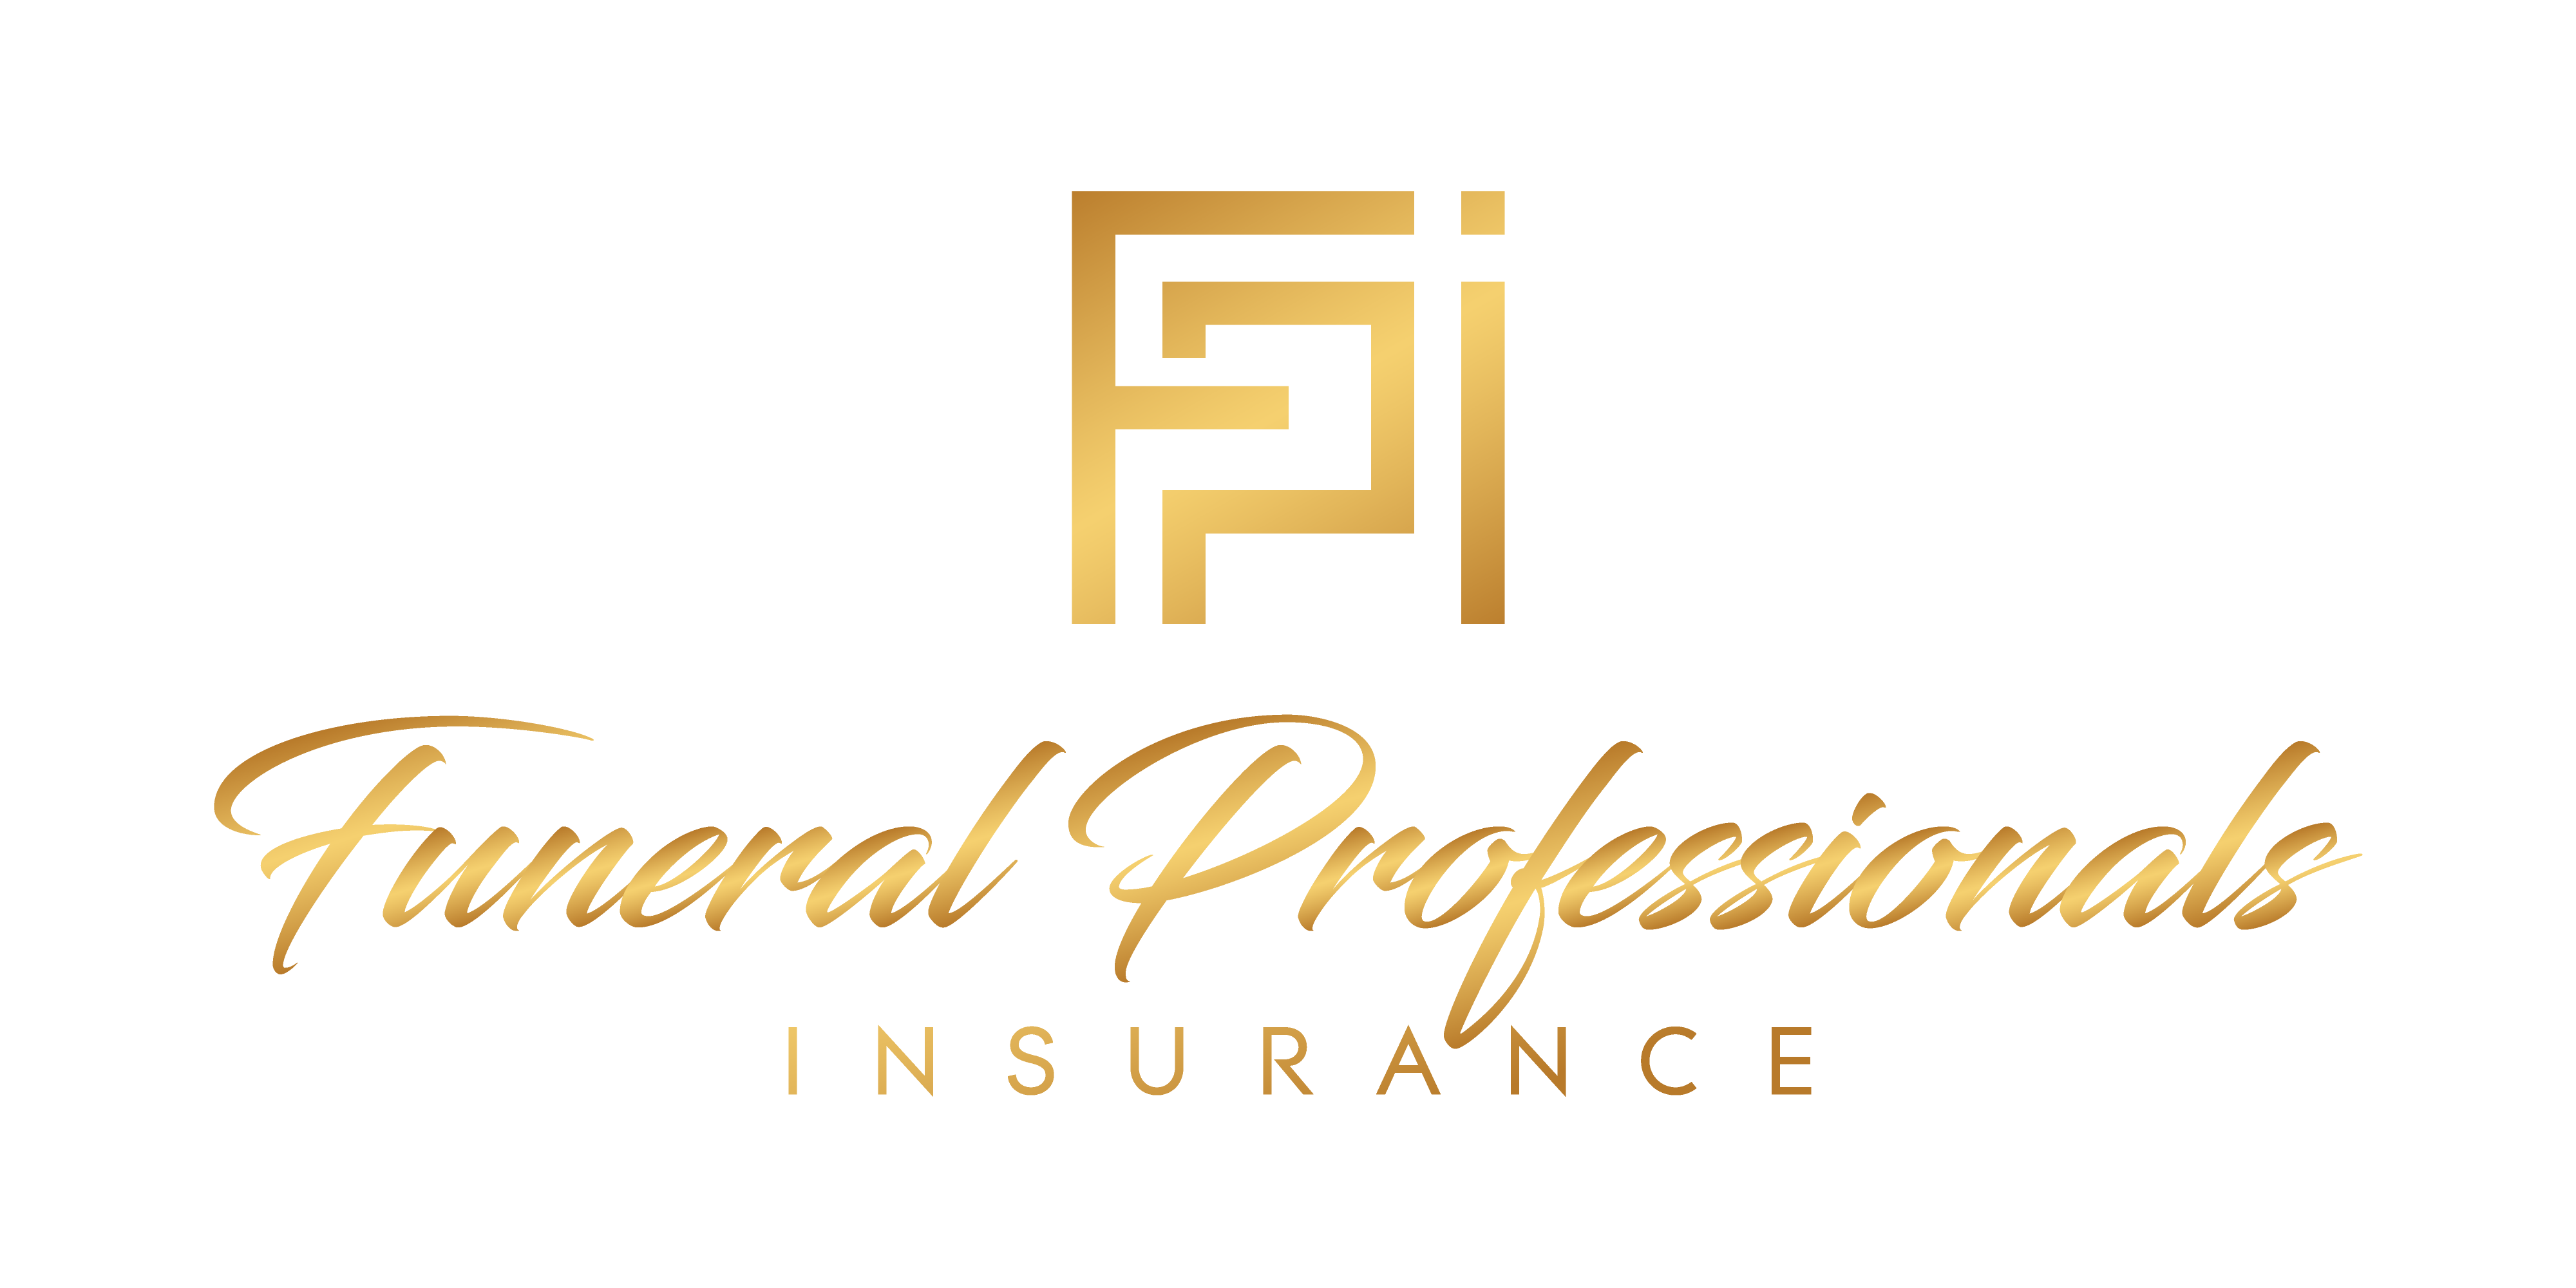 Funeral Professionals Insurance